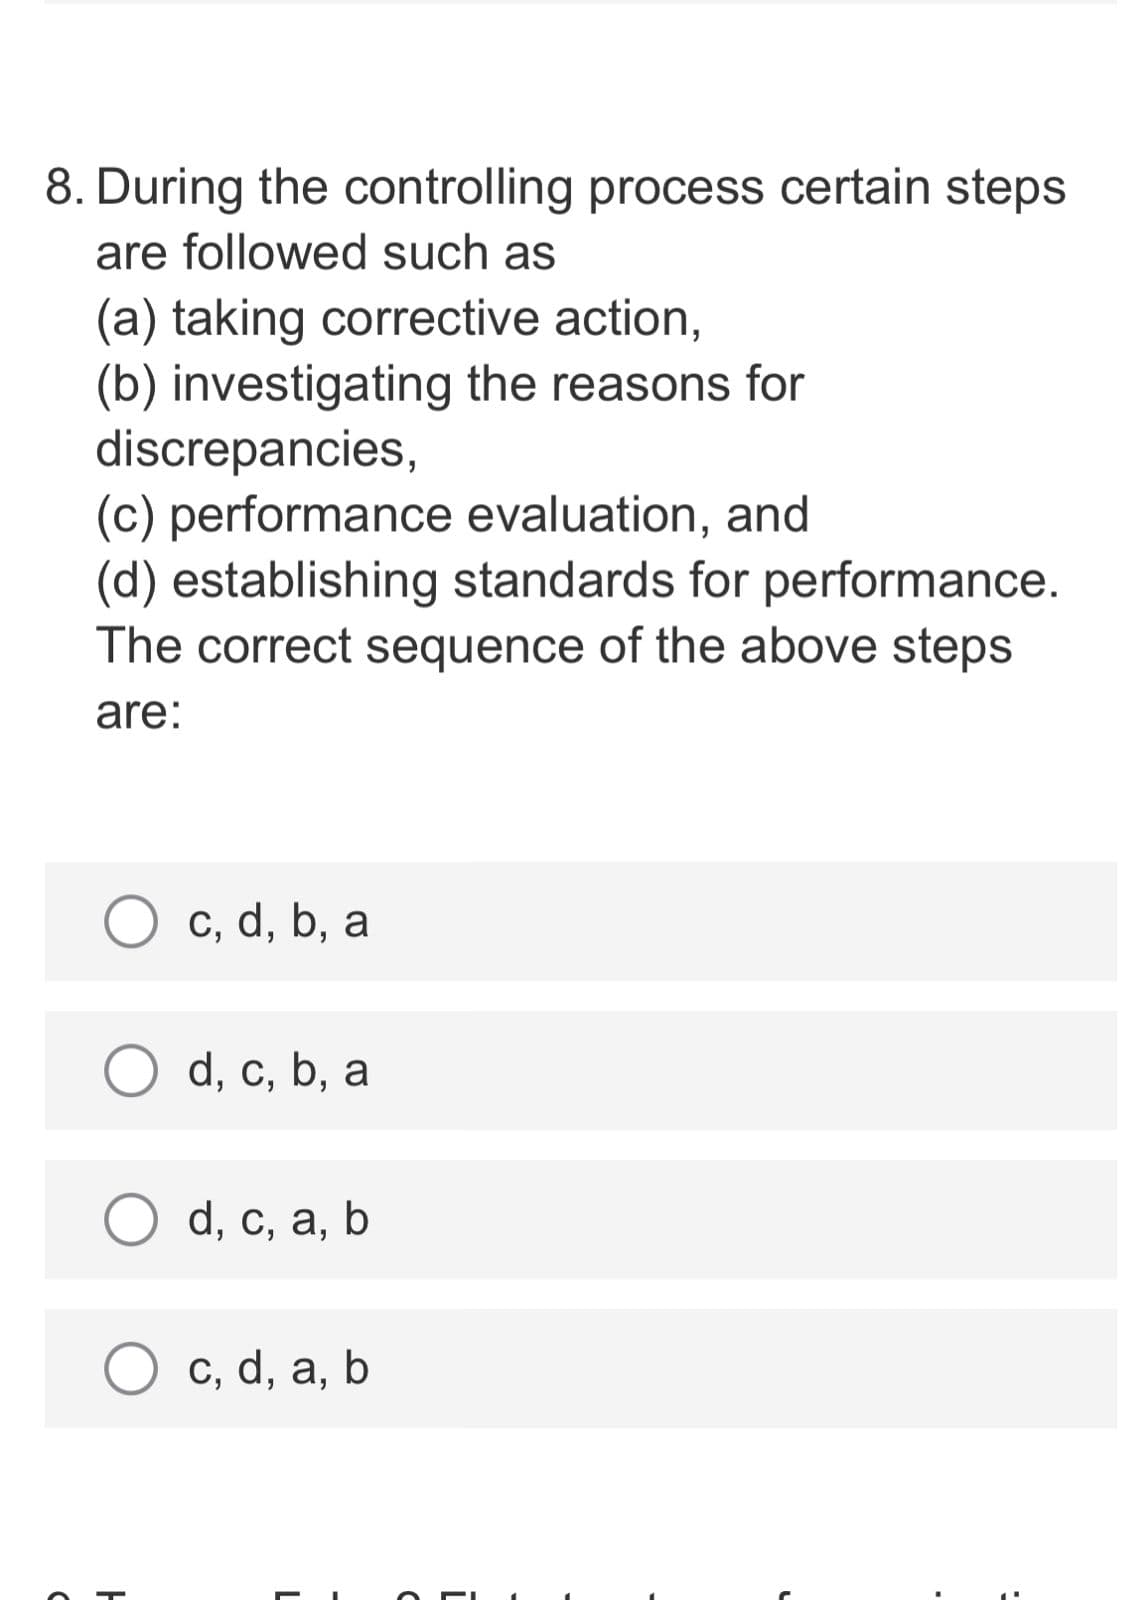 8. During the controlling process certain steps
are followed such as
(a) taking corrective action,
(b) investigating the reasons for
discrepancies,
(c) performance evaluation, and
(d) establishing standards for performance.
The correct sequence of the above steps
are:
c, d, b, a
d, с, b, a
d, с, а, b
c, d, a, b
L
